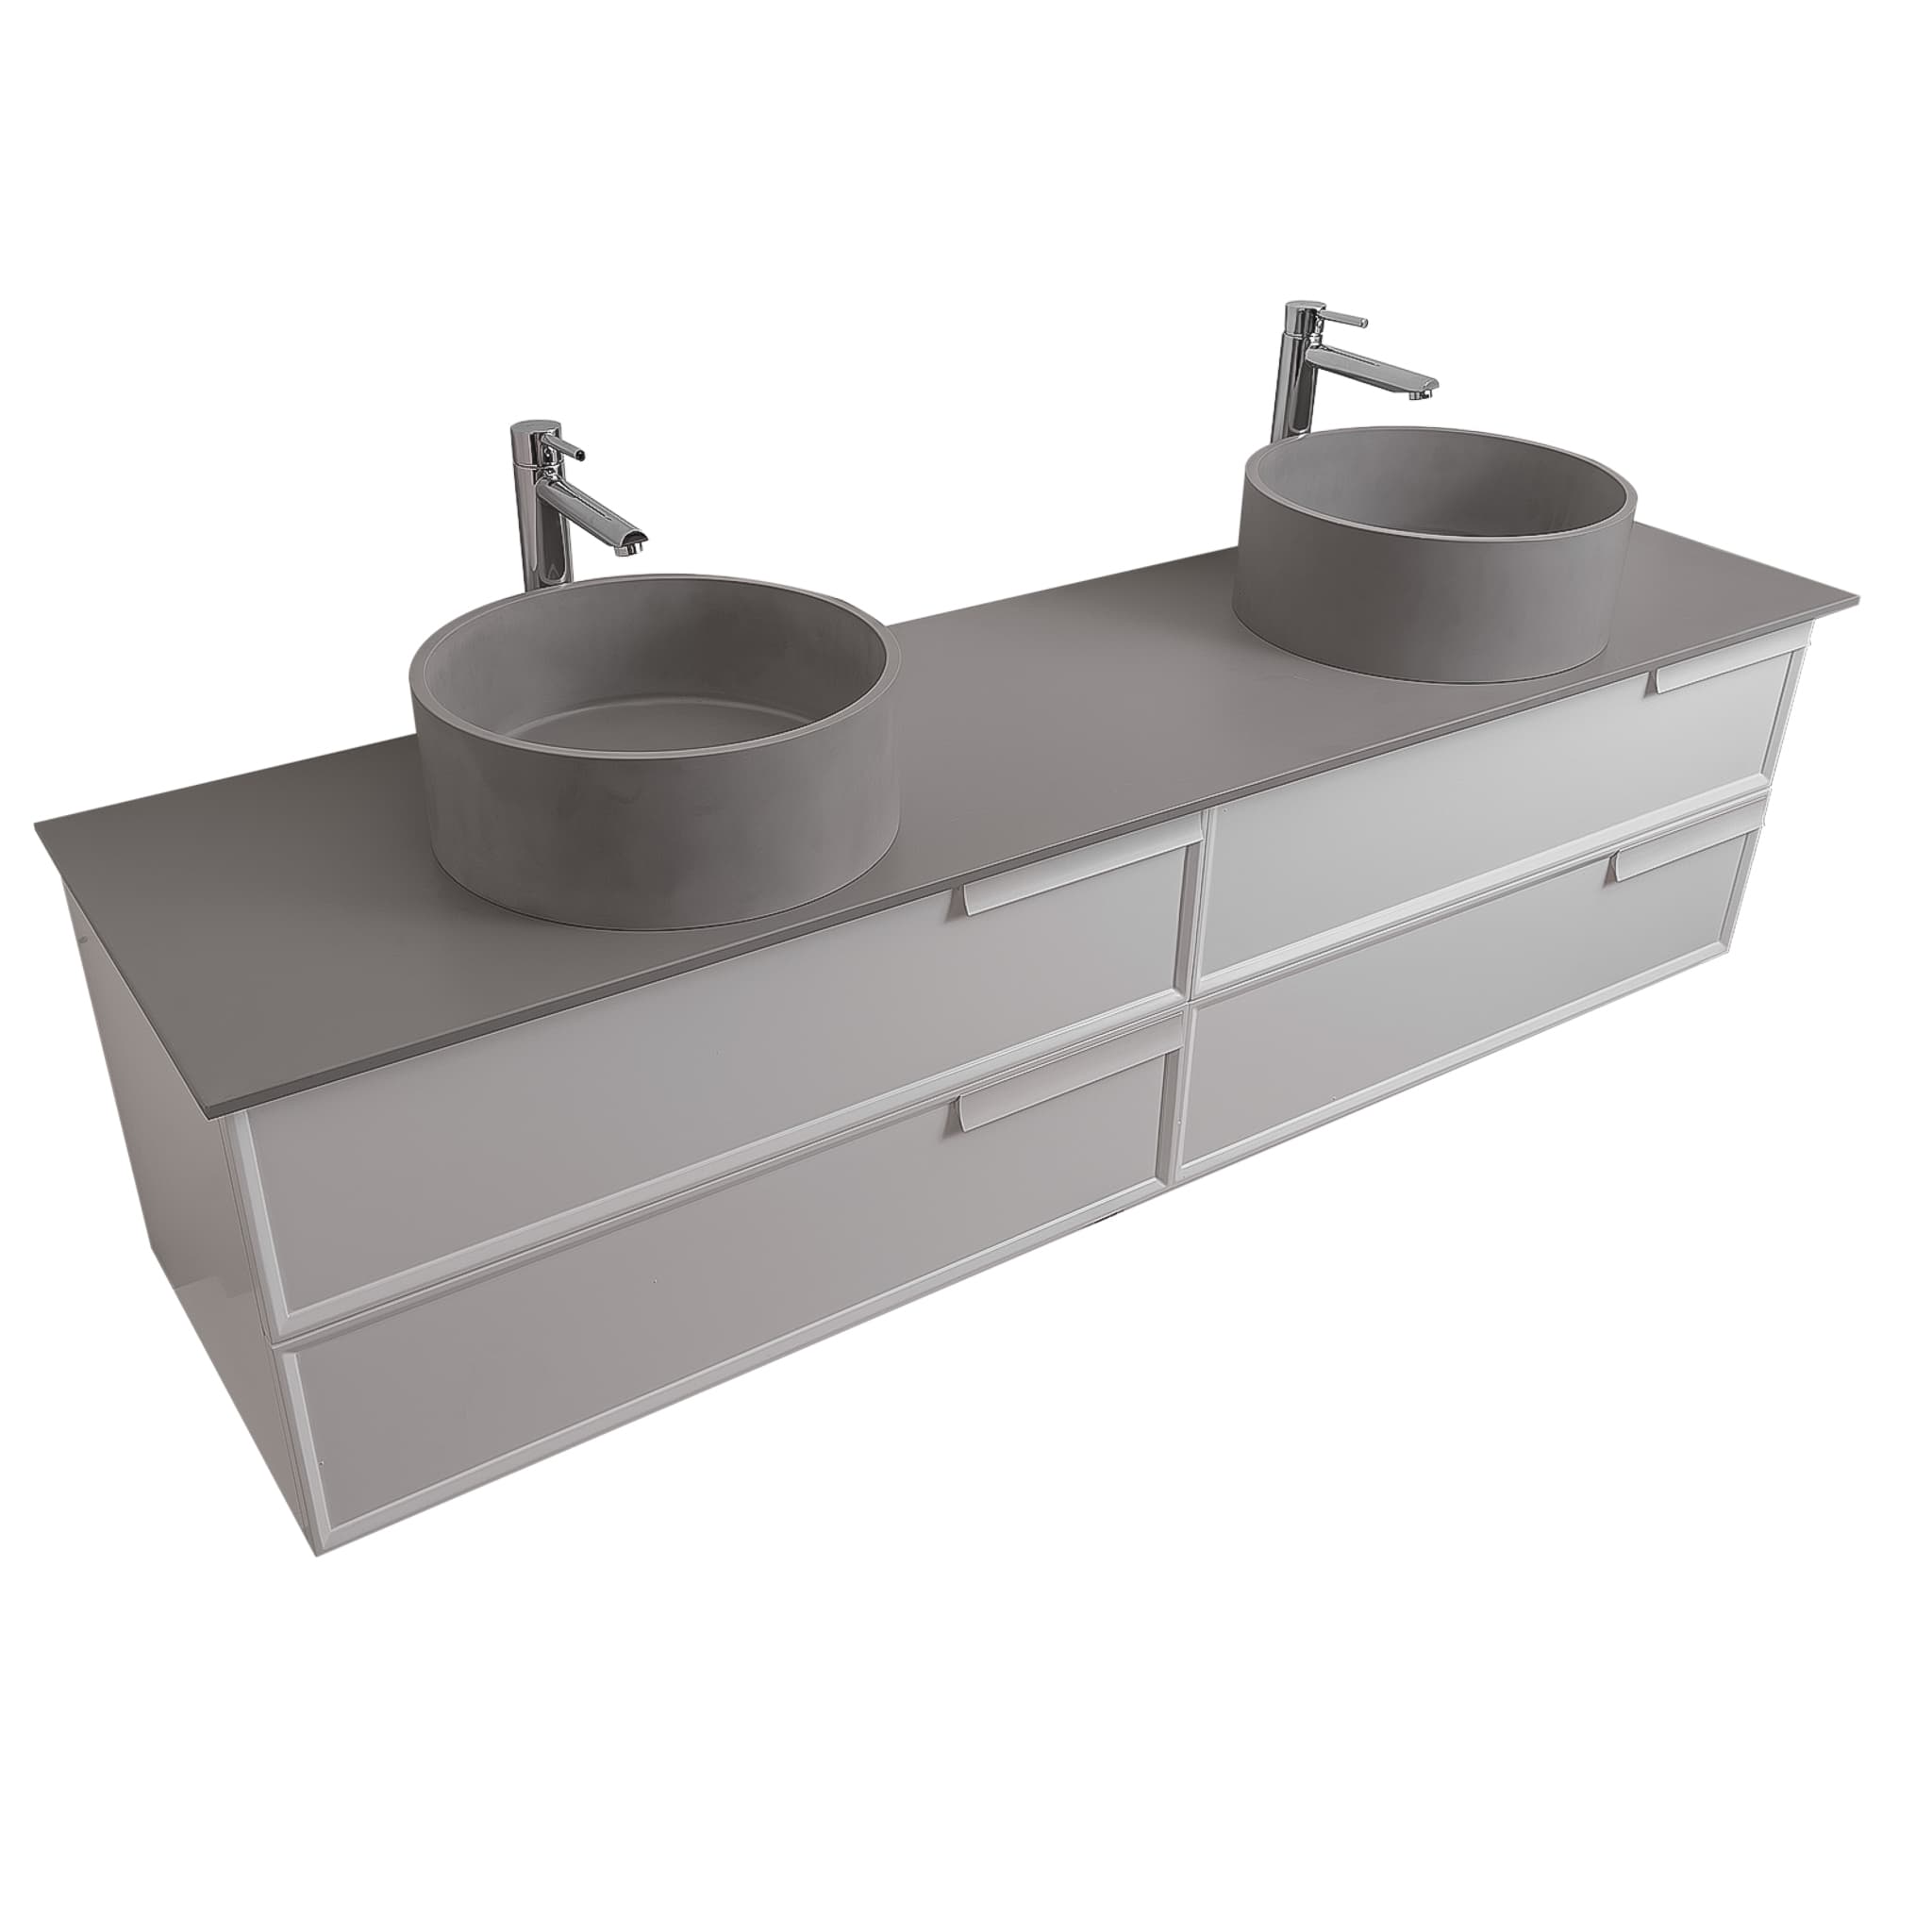 Garda 72 Matte White Cabinet, Solid Surface Flat Grey Counter and Two Round Solid Surface Grey Basin 1386, Wall Mounted Modern Vanity Set